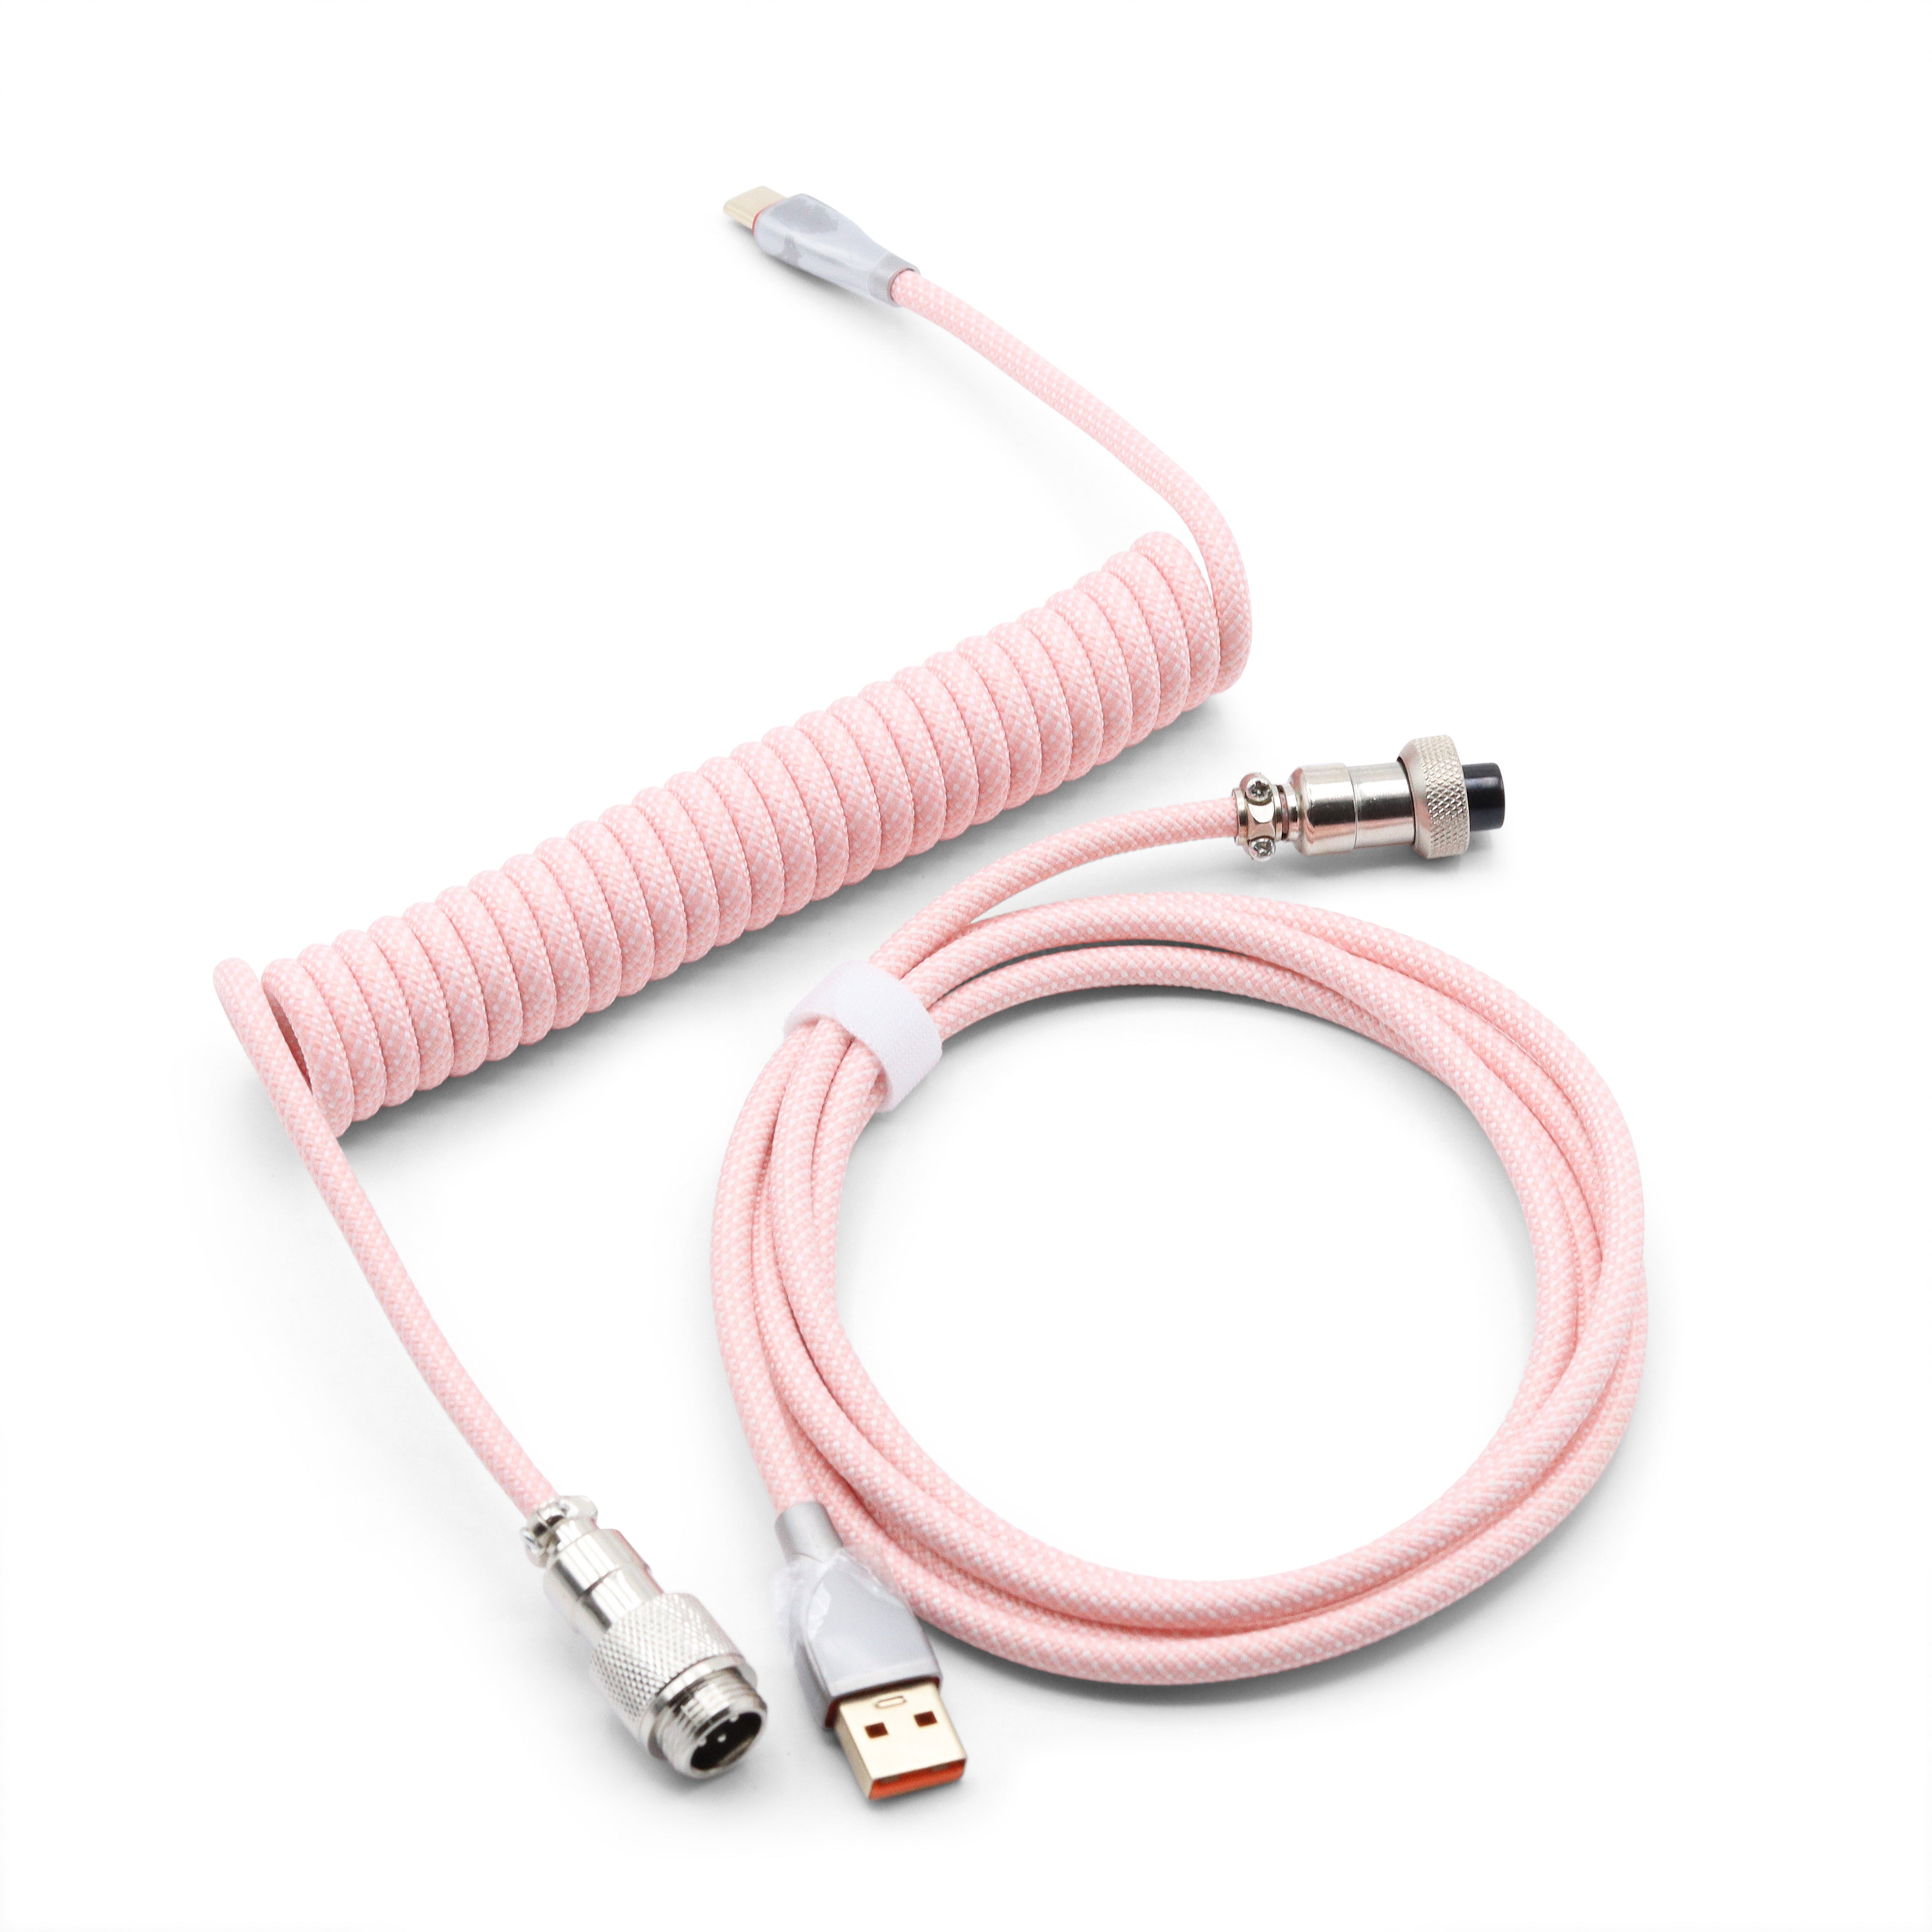 Glacier Premium Durable Quality Braided USB-C to USB-A Coiled Cable with Detachable Metal Aviator Connector Plug for Mechanical Keyboard-Pink-